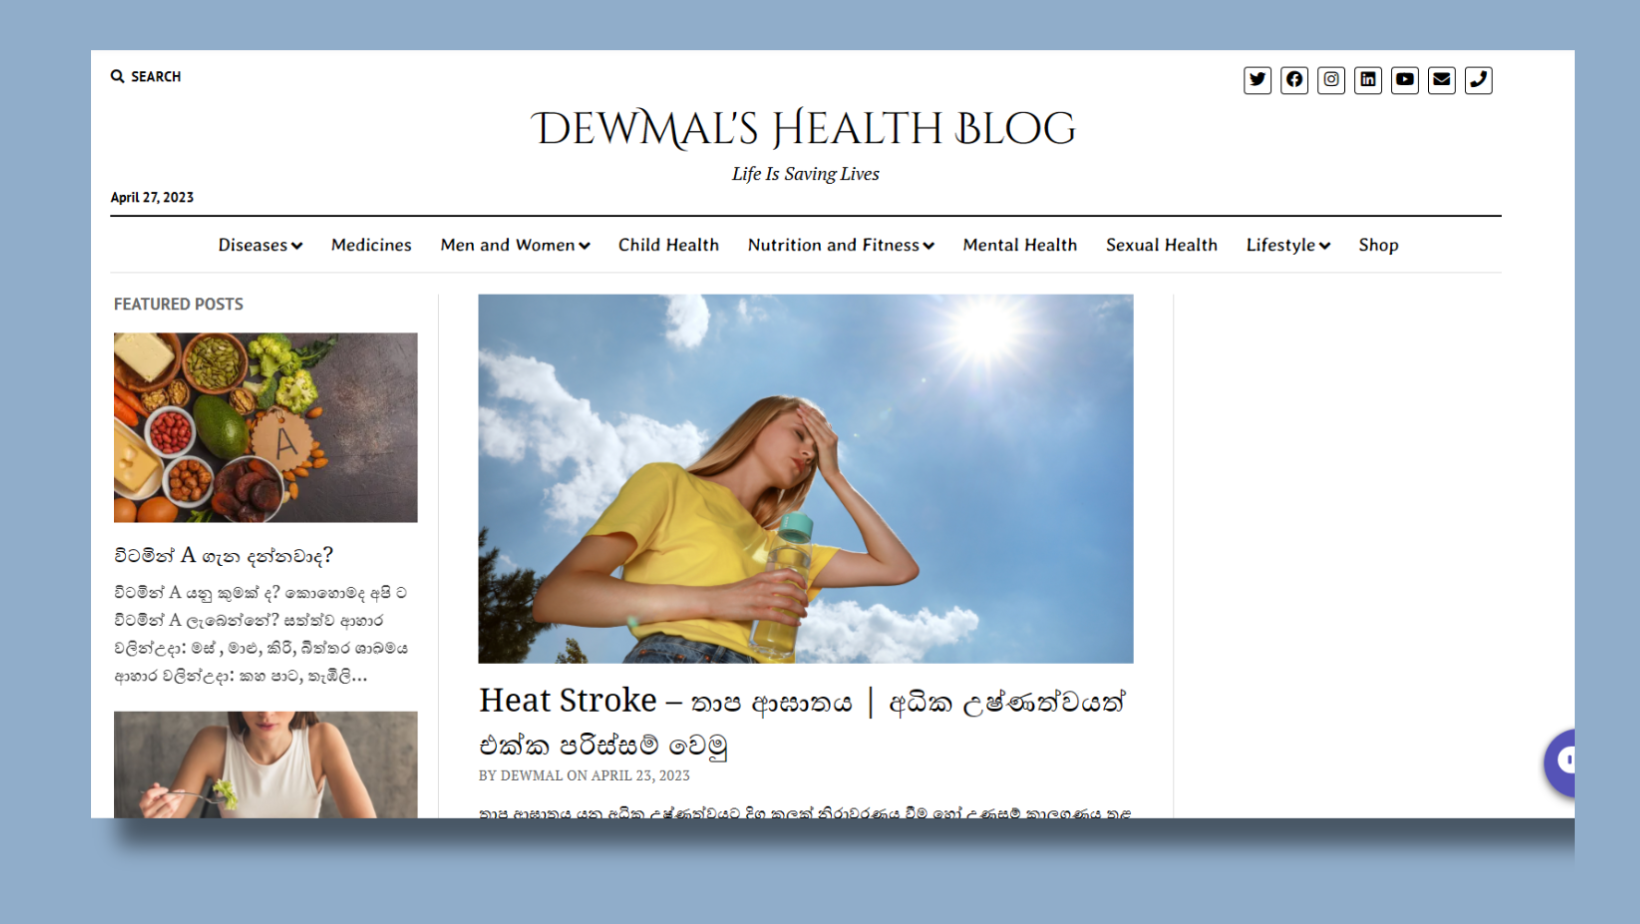 Reviving Dewmal’s Health Blog: Evidence-based Insights on Health and Wellness